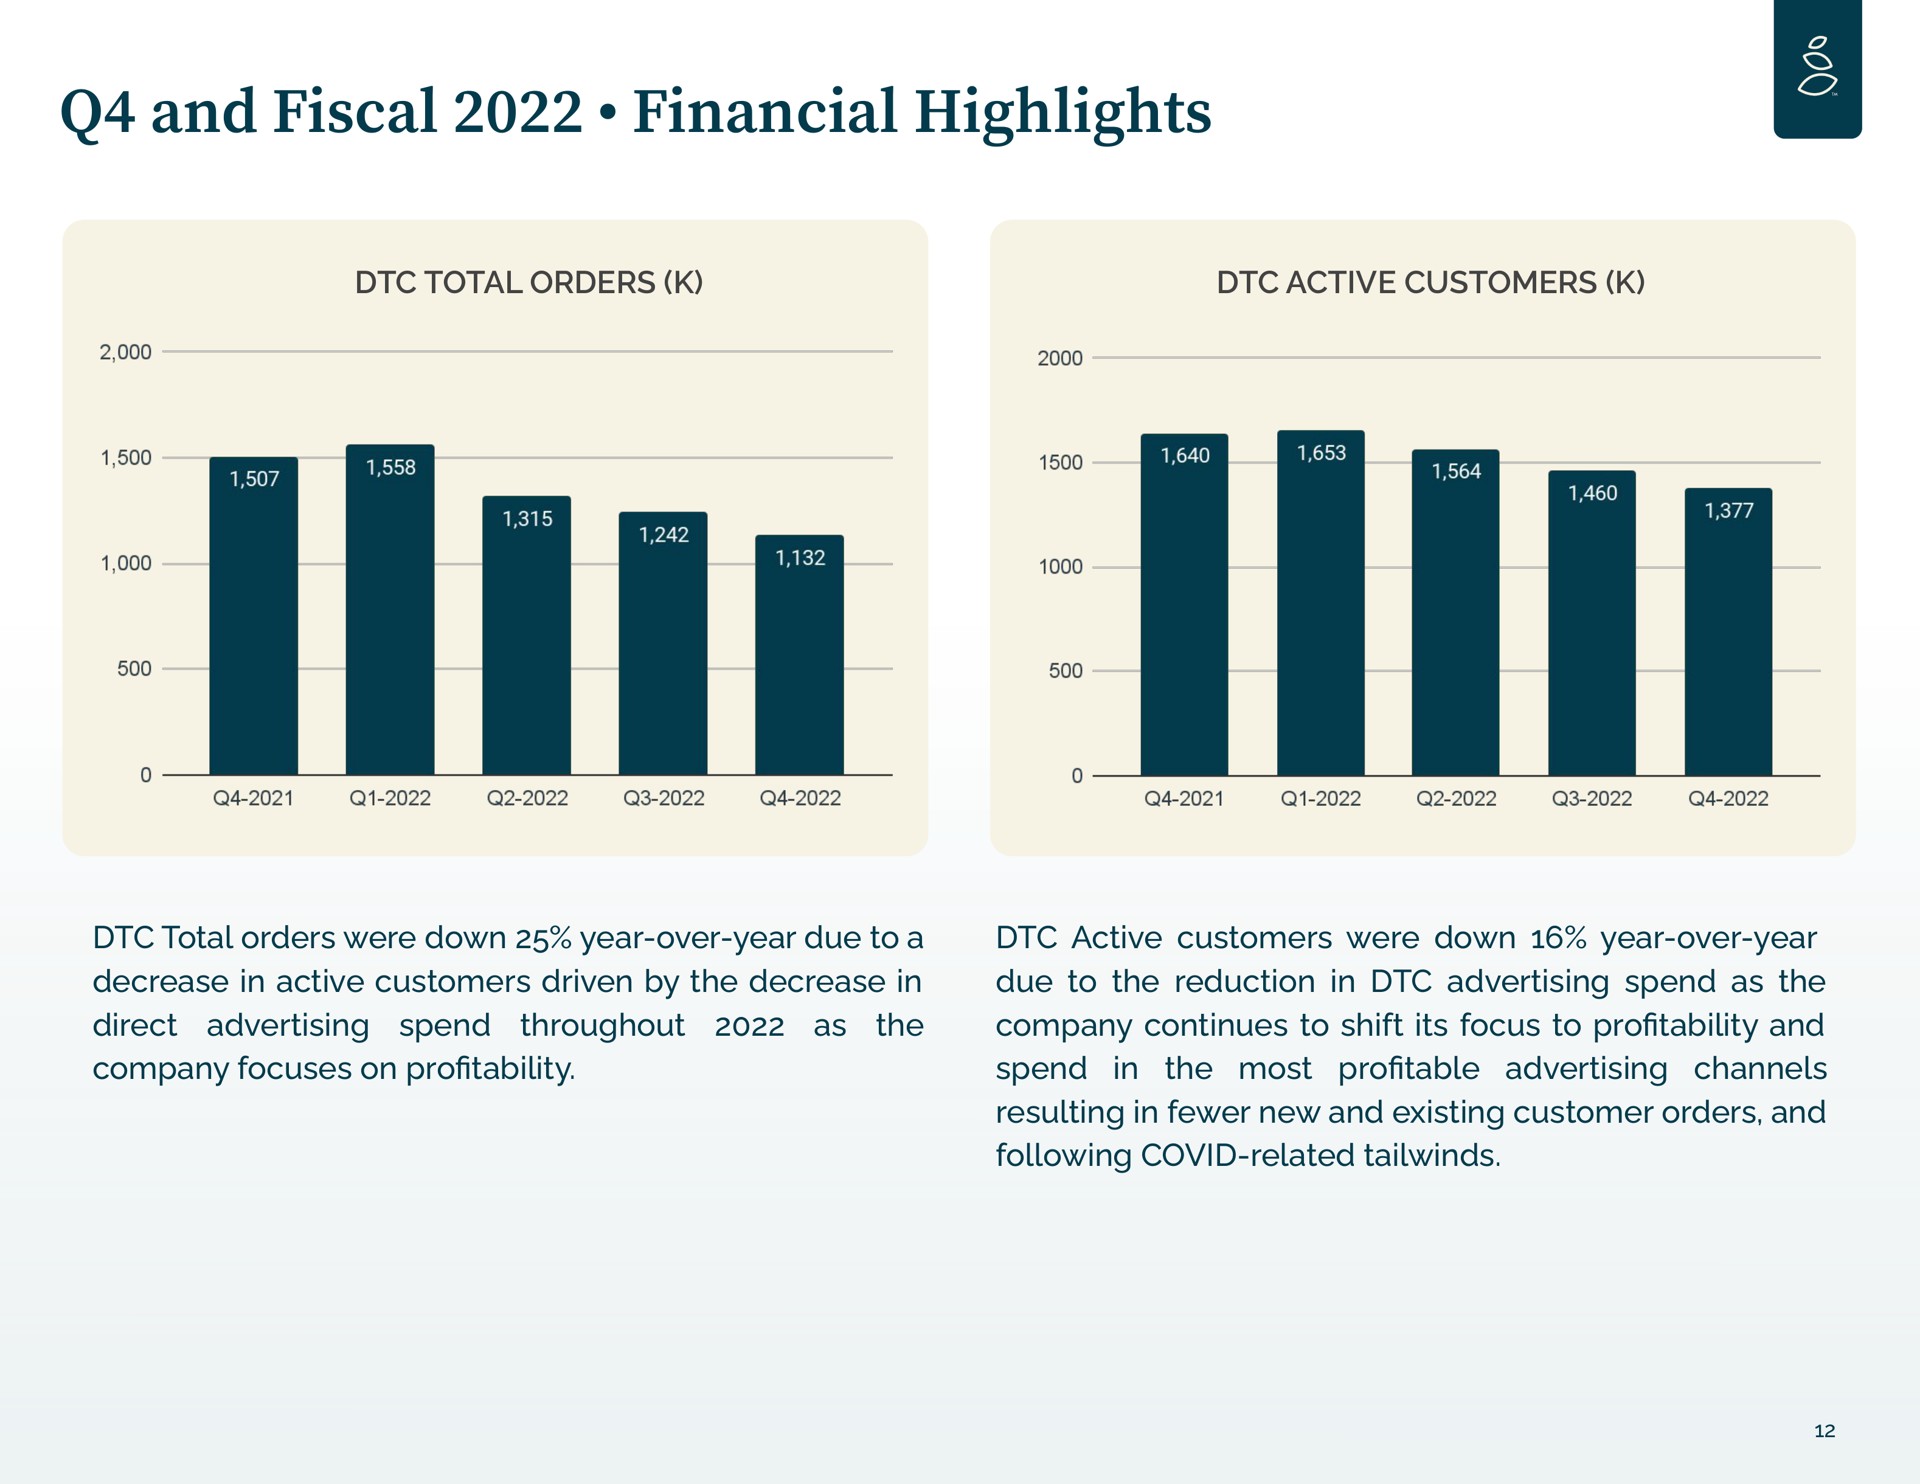 and fiscal financial highlights | Grove